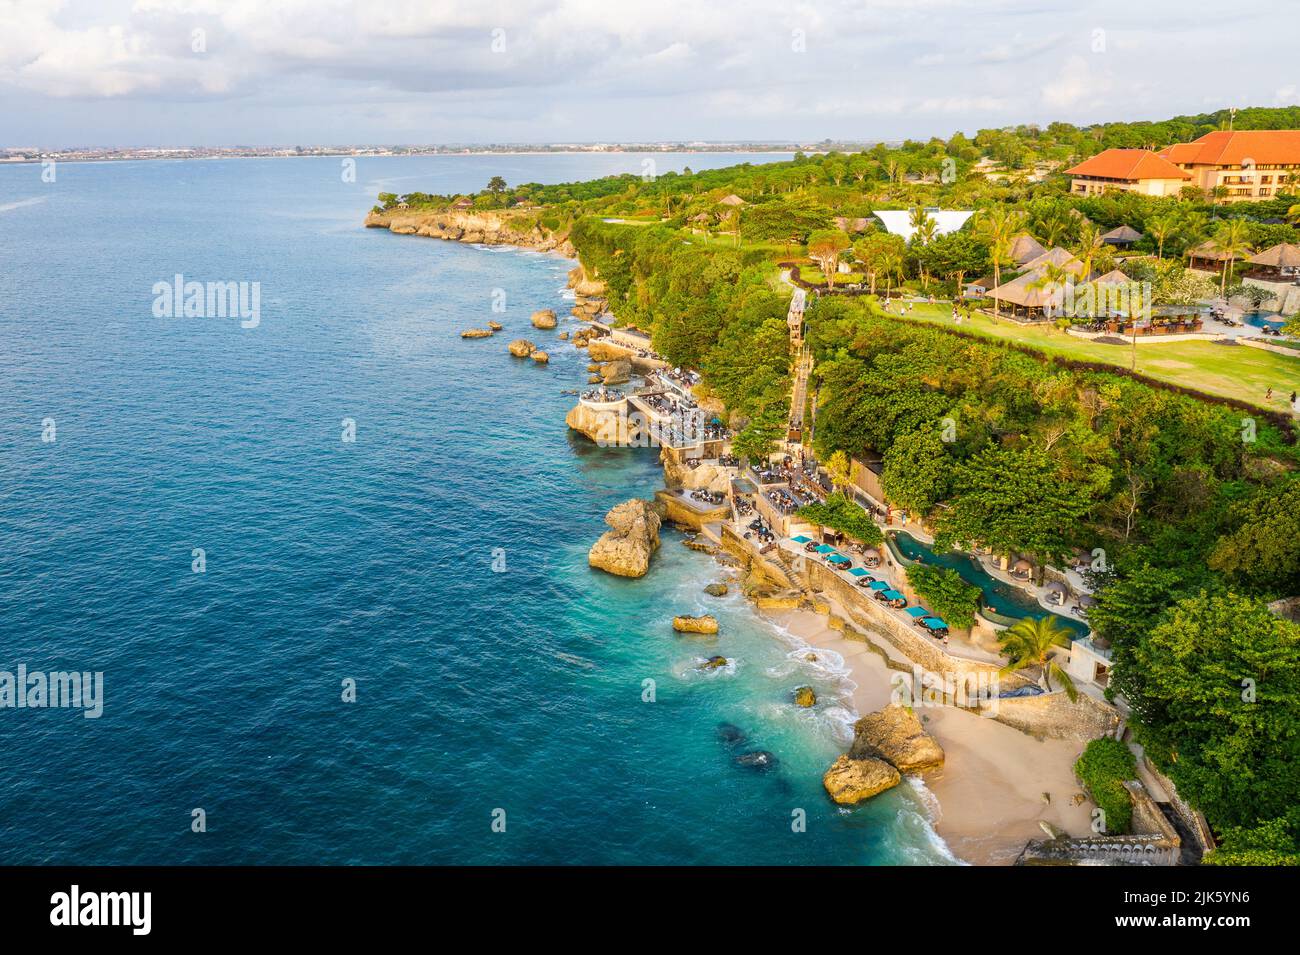 Bali, Indonesia - July 4 2022: Aerial view of the famous Ayana luxury resort and the Rock bar that lies directly on the cliff of the Bukit Peninsula i Stock Photo